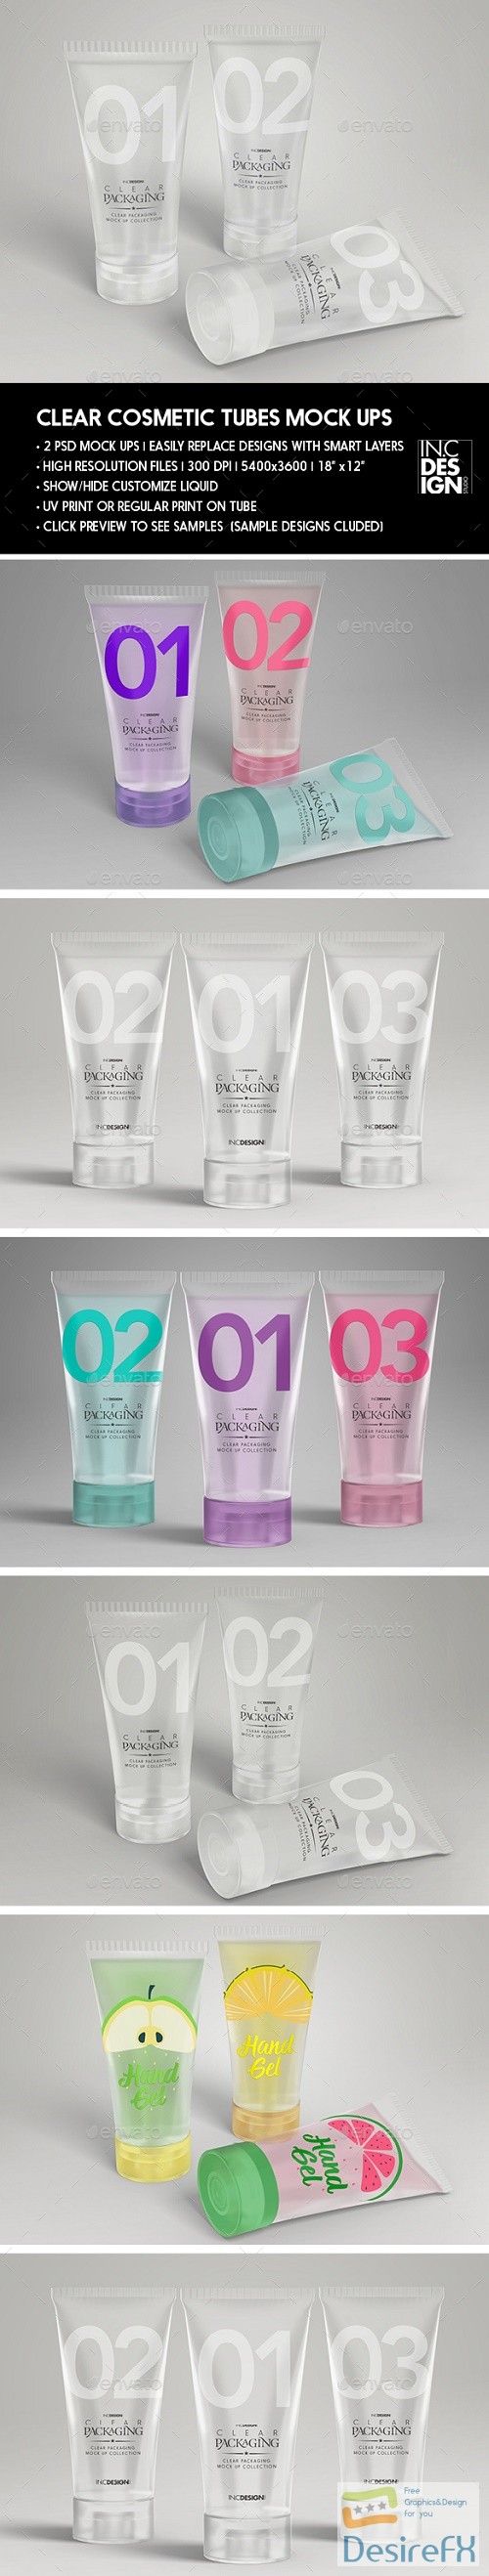 Download Desirefx.com | Download Clear Cosmetic Tube MockUps 20753300